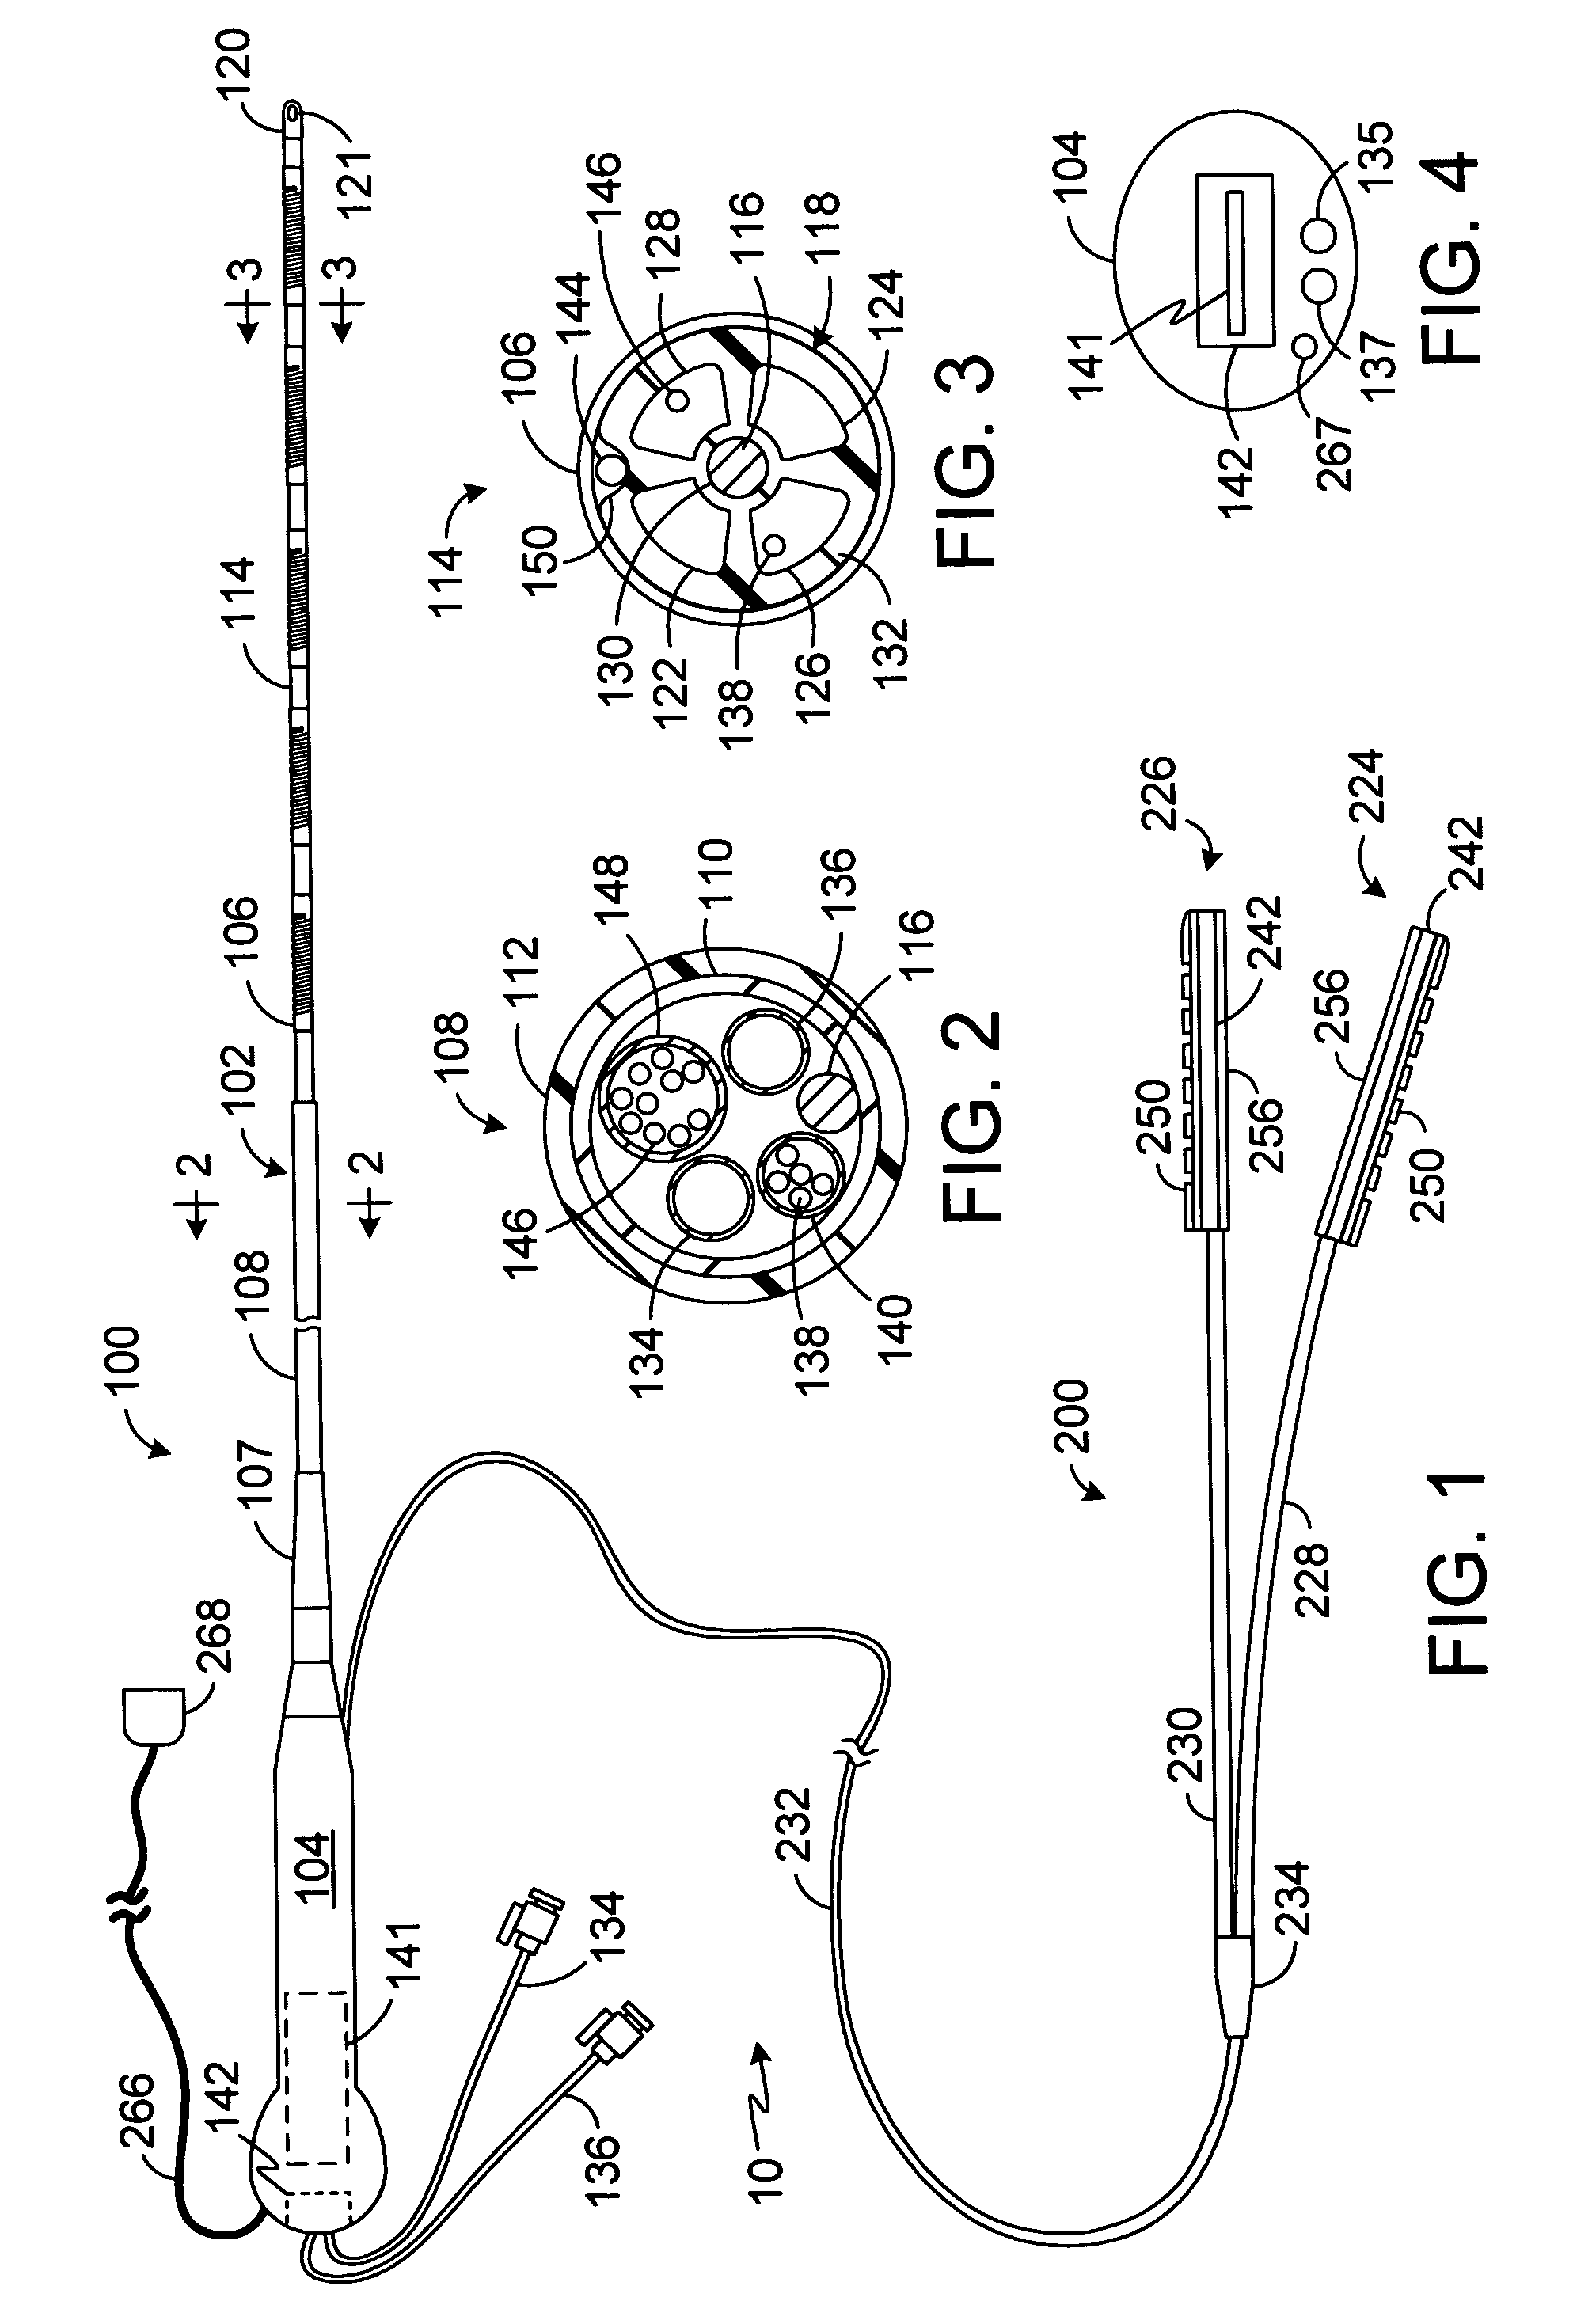 Hybrid lesion formation apparatus, systems and methods